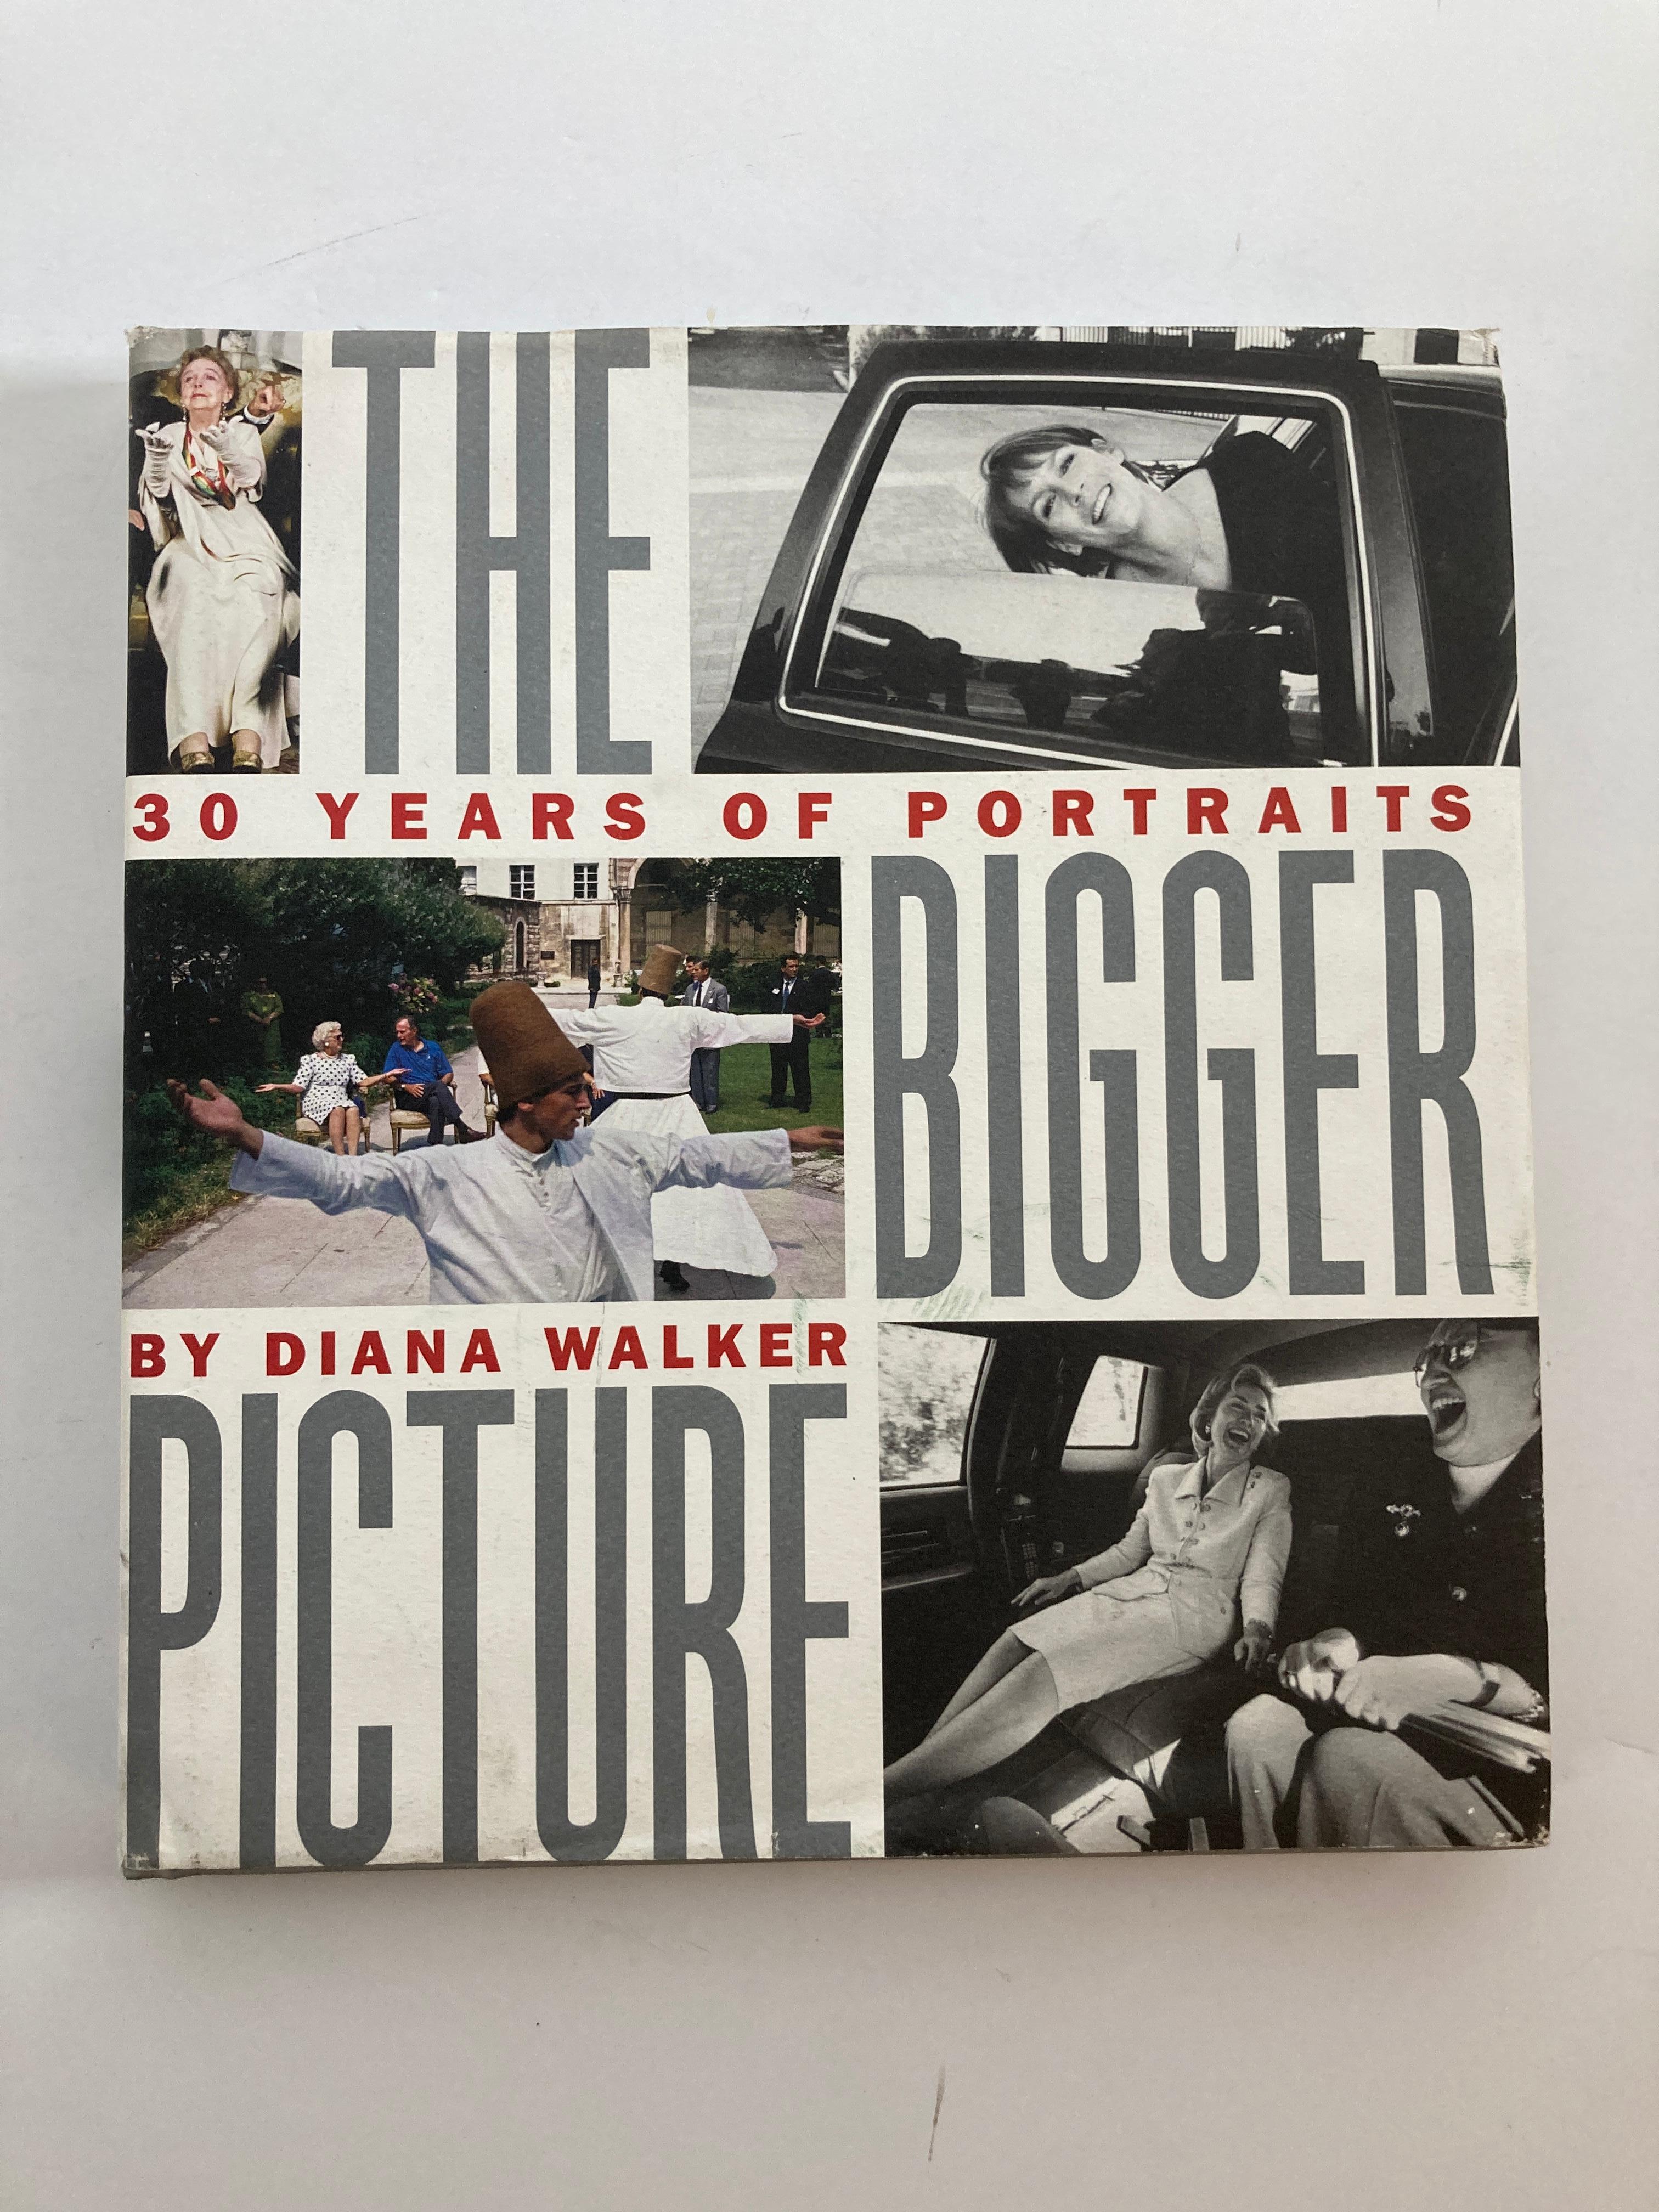 The Bigger Picture: 30 Years of Portraits Book by Diana H. Walker.
As a Time magazine photographer covering the White House through four presidential administrations, Diana Walker enjoyed incomparable access to the world's major movers and shakers.